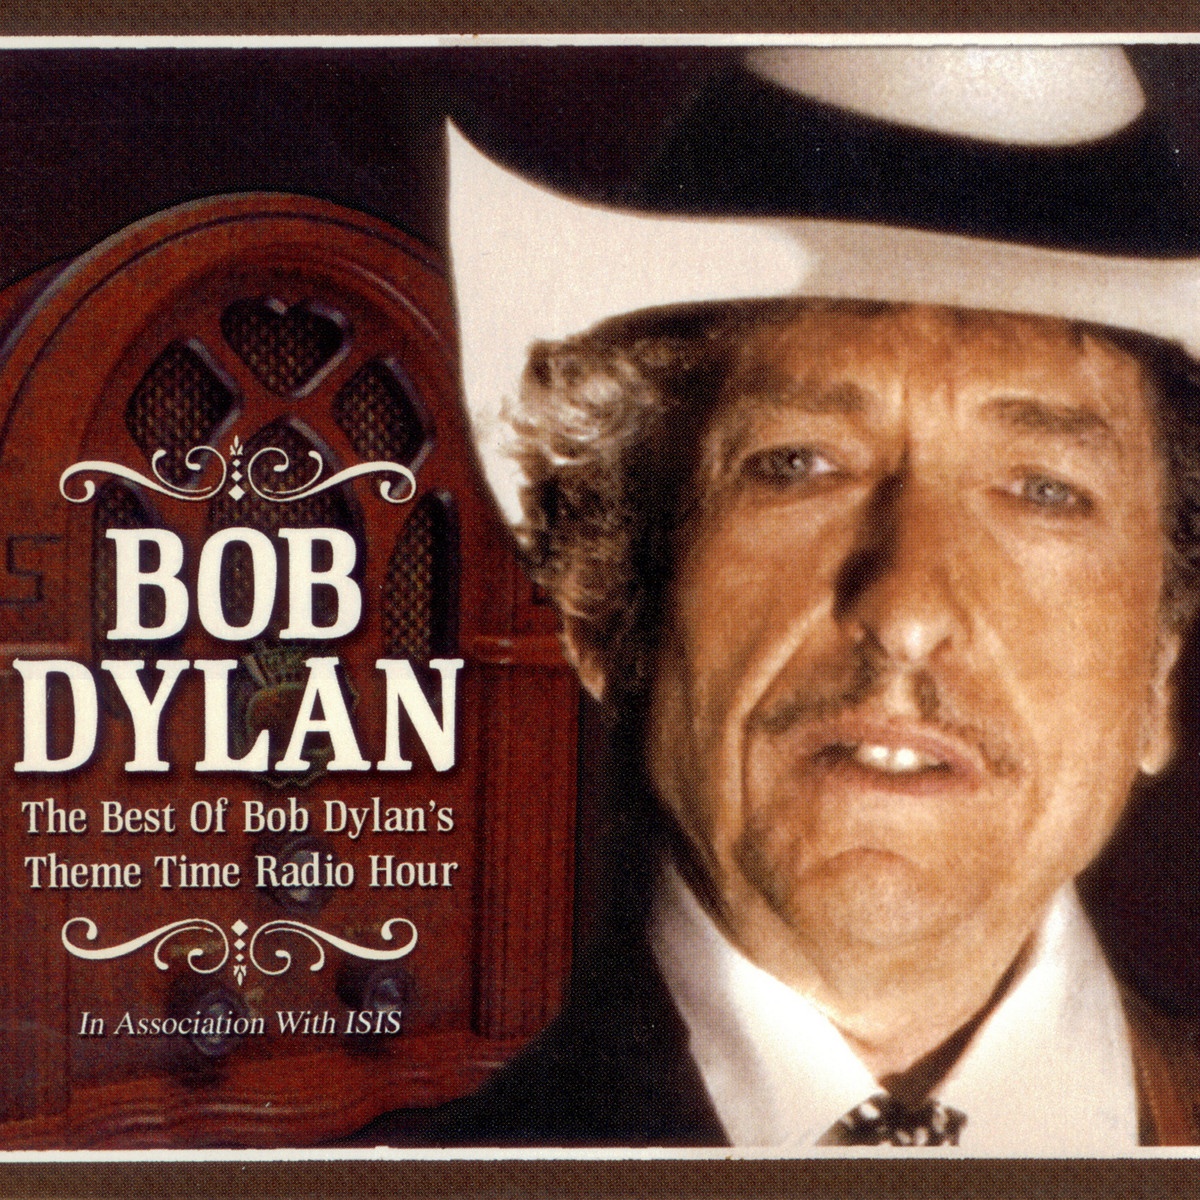 The Best Of Bob Dylan's Theme Time Radio Hour